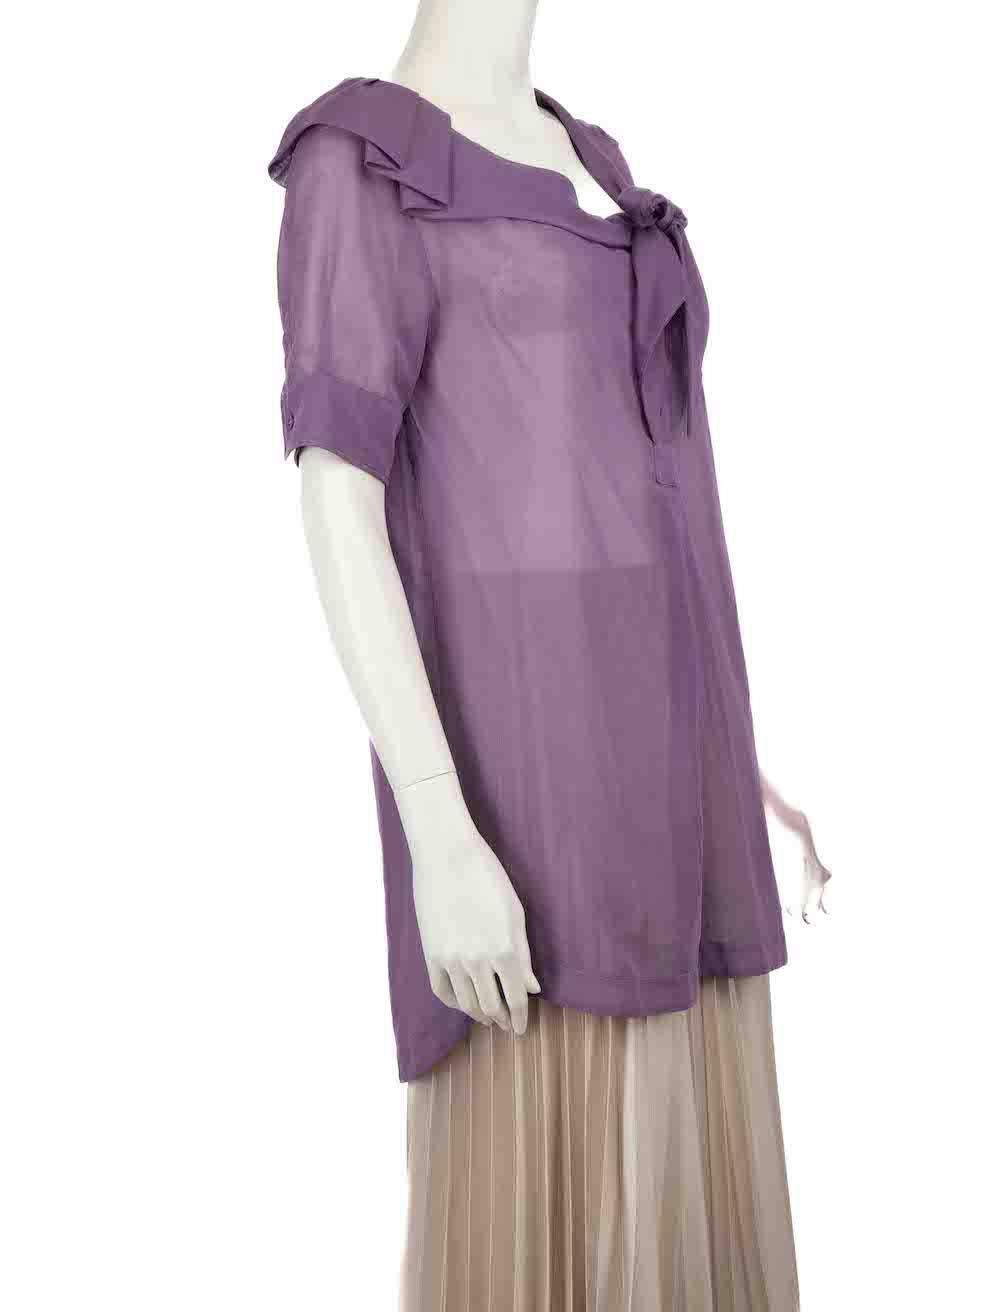 CONDITION is Very good. Hardly any visible wear to blouse is evident on this used Sportmax designer resale item.
 
 
 
 Details
 
 
 Purple
 
 Cotton
 
 Blouse
 
 Oversized fit
 
 Sheer
 
 Short sleeves
 
 Button up fastening
 
 Neck tie detail
 
